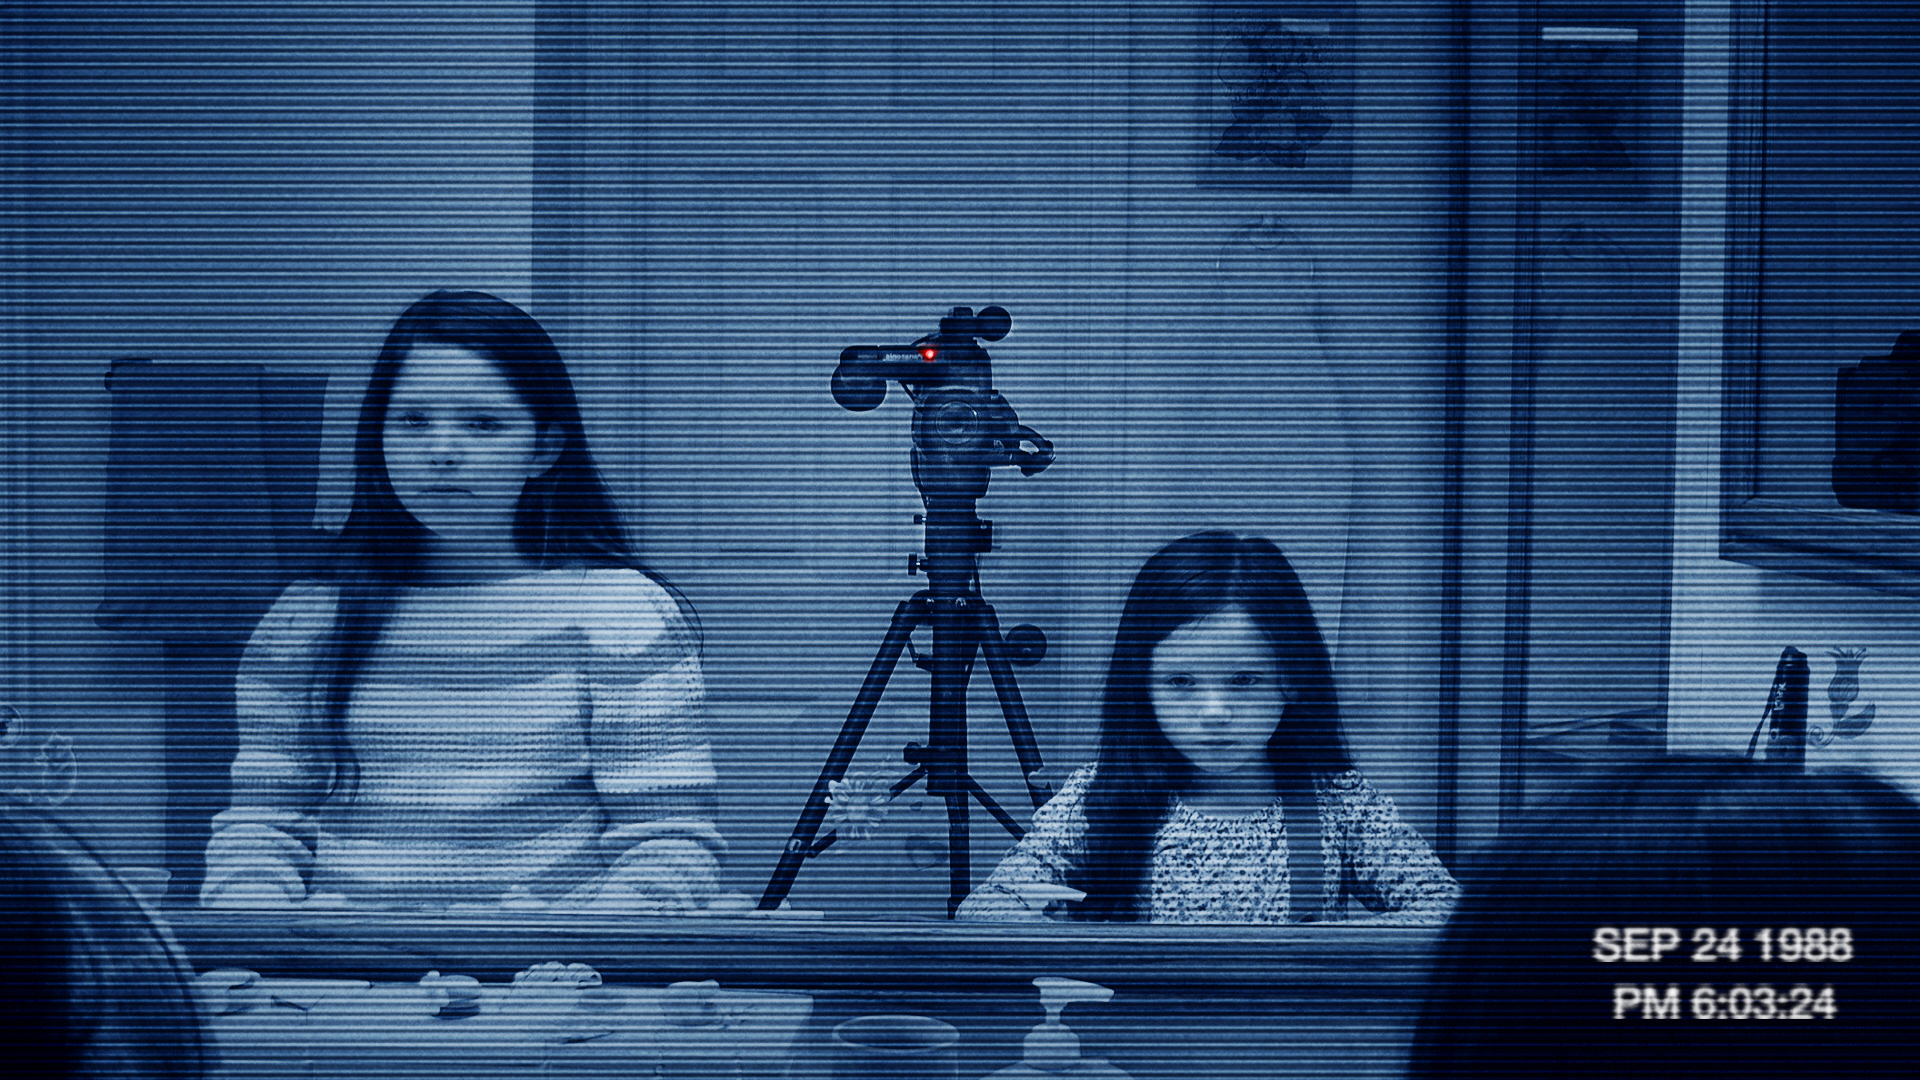 Paranormal Activity, Paramount Pictures